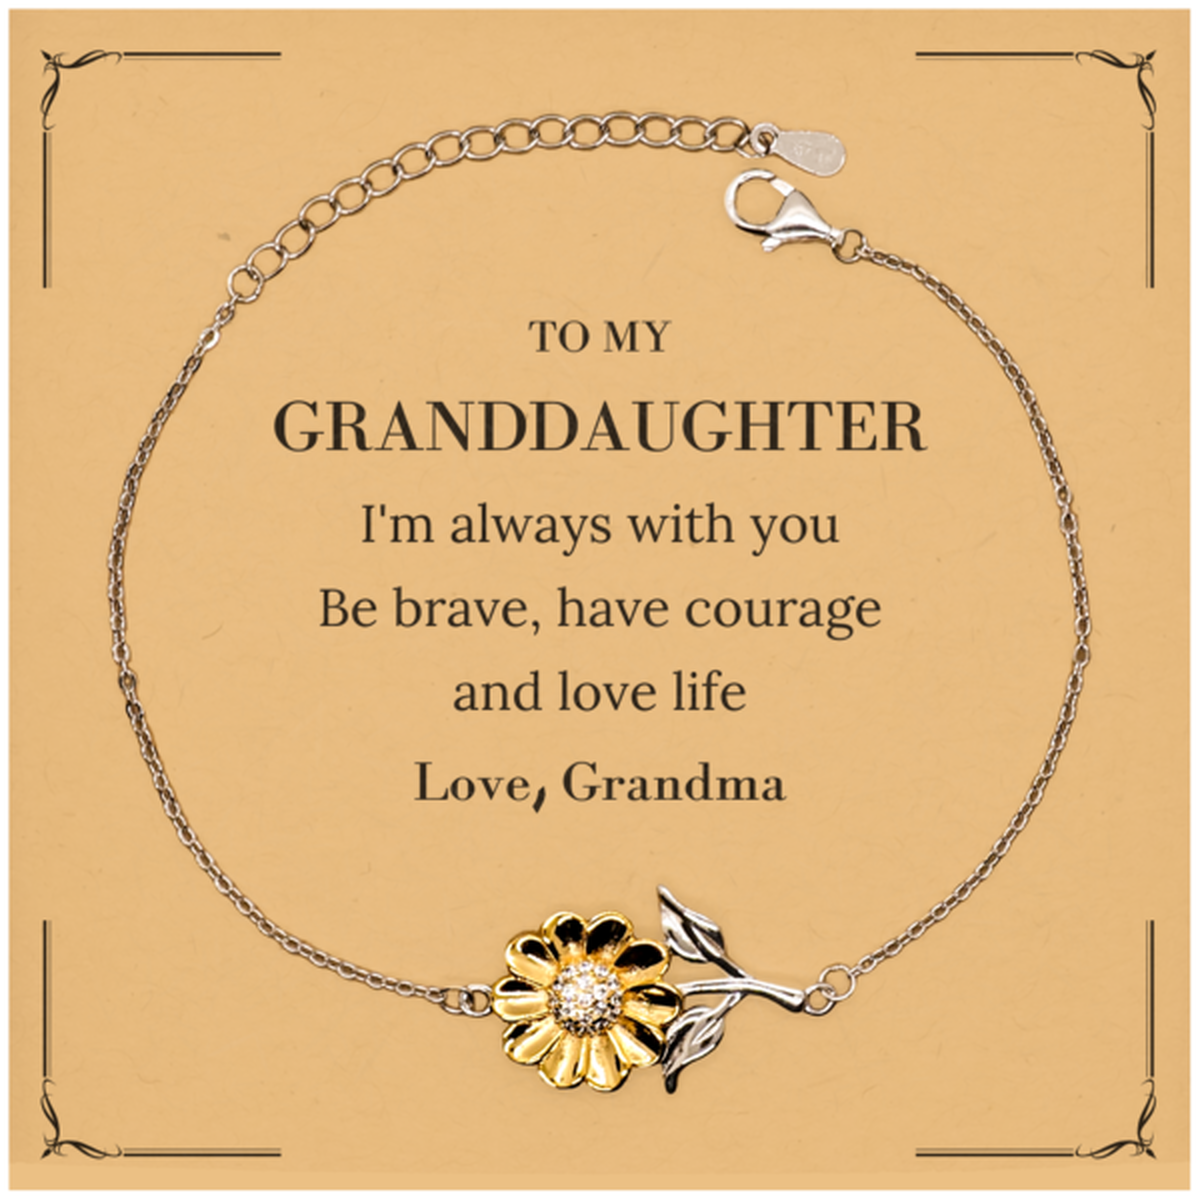 To My Granddaughter Gifts from Grandma, Unique Sunflower Bracelet Inspirational Christmas Birthday Graduation Gifts for Granddaughter I'm always with you. Be brave, have courage and love life. Love, Grandma